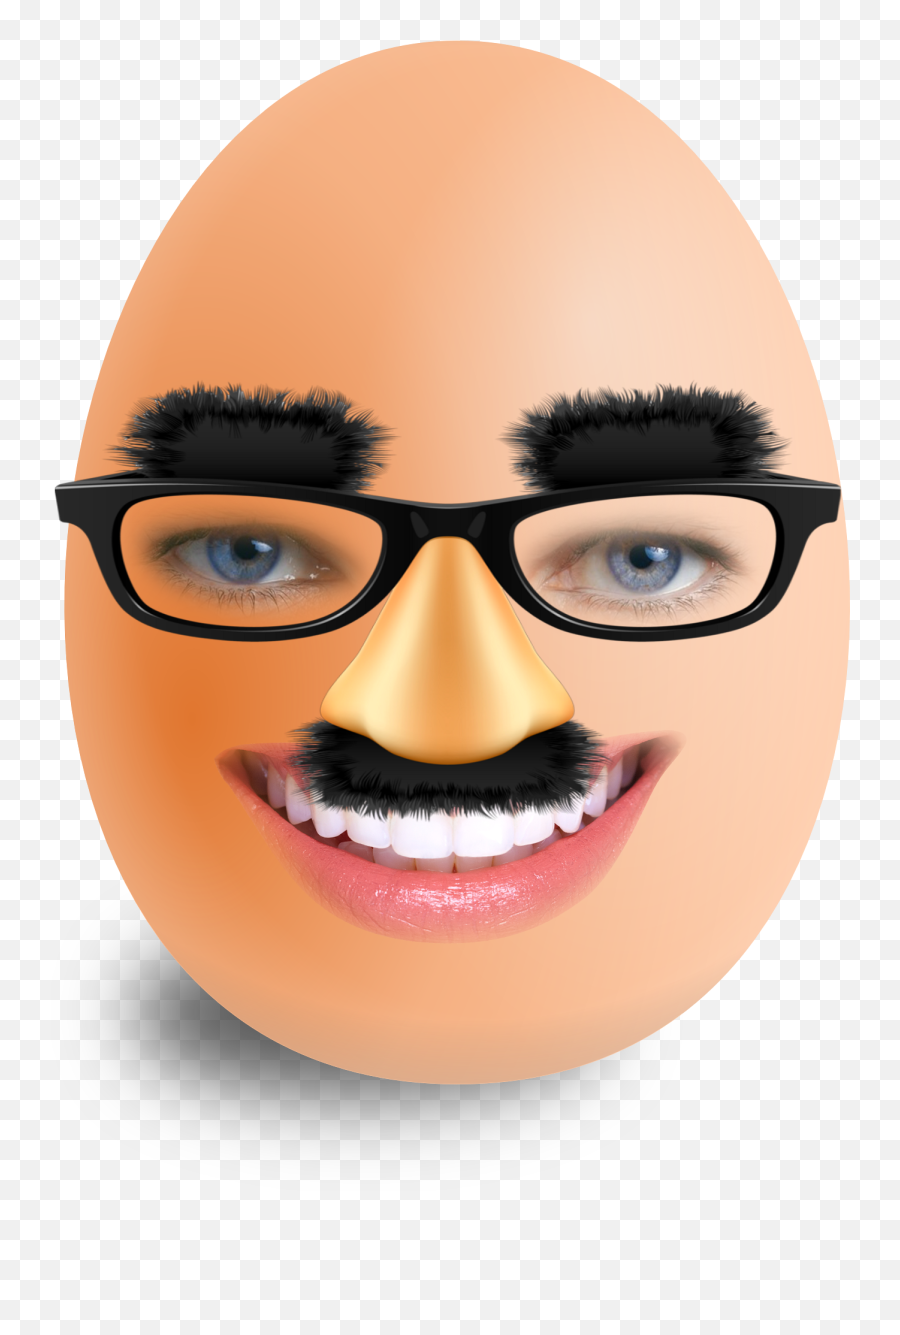 The Front Page Of The Internet - Transparent Egg With Face Emoji,Hiveswap Act 1 Emoticons